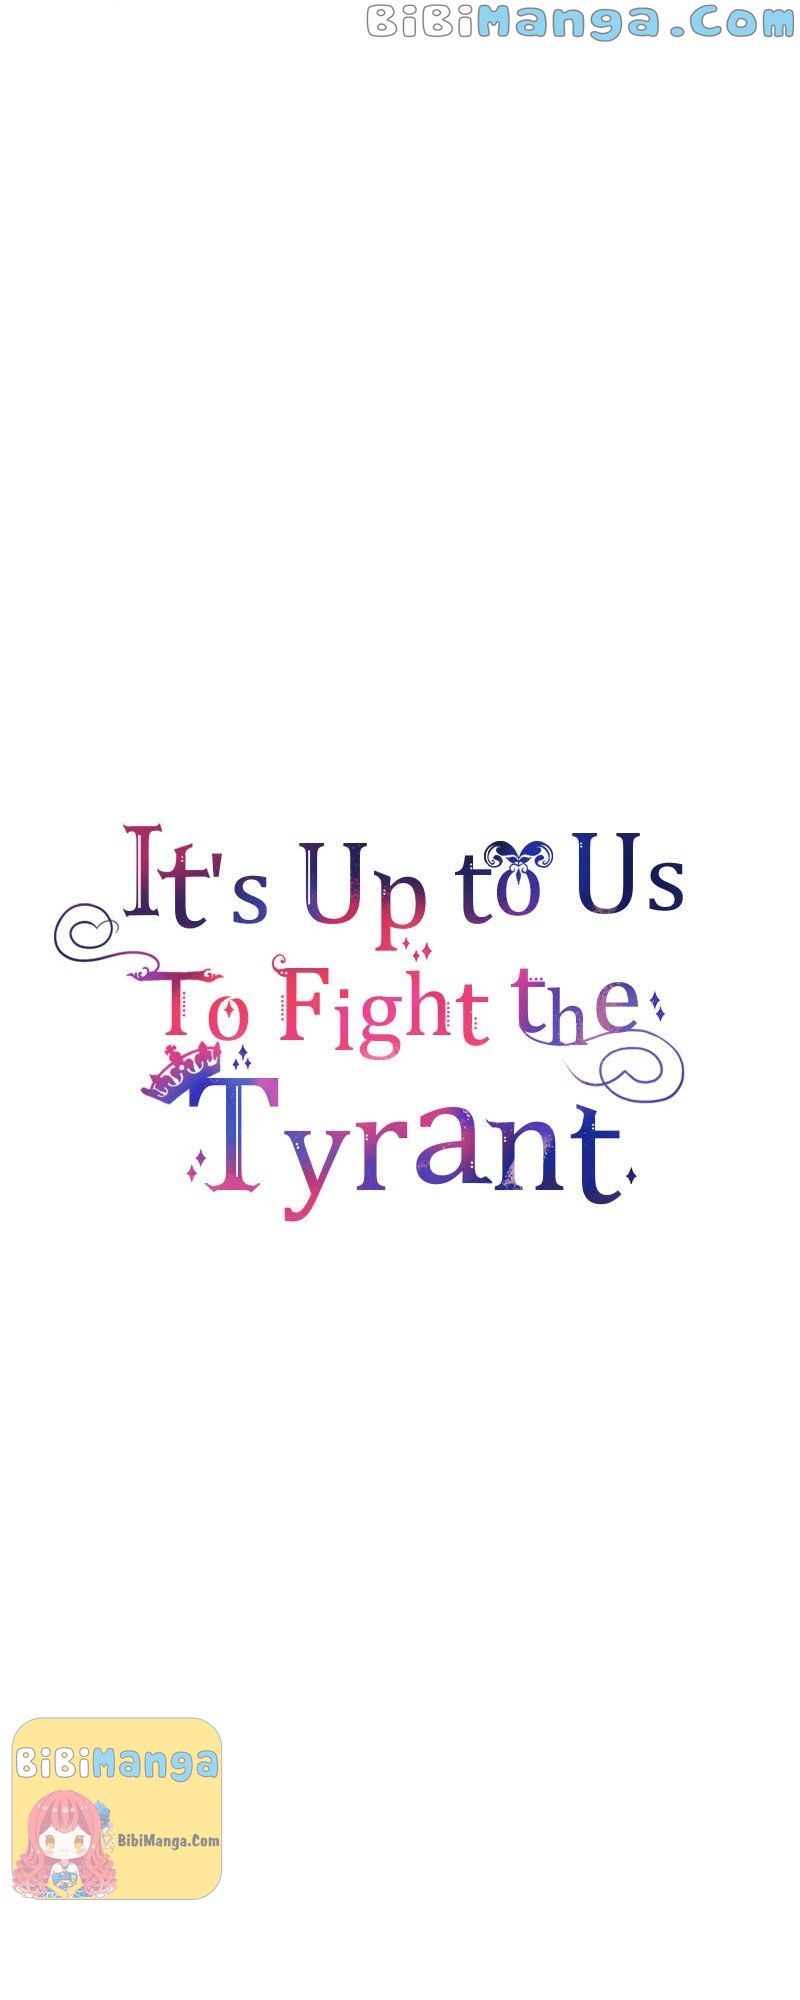 It’s Up to Us to Fight the Tyrant chapter 4